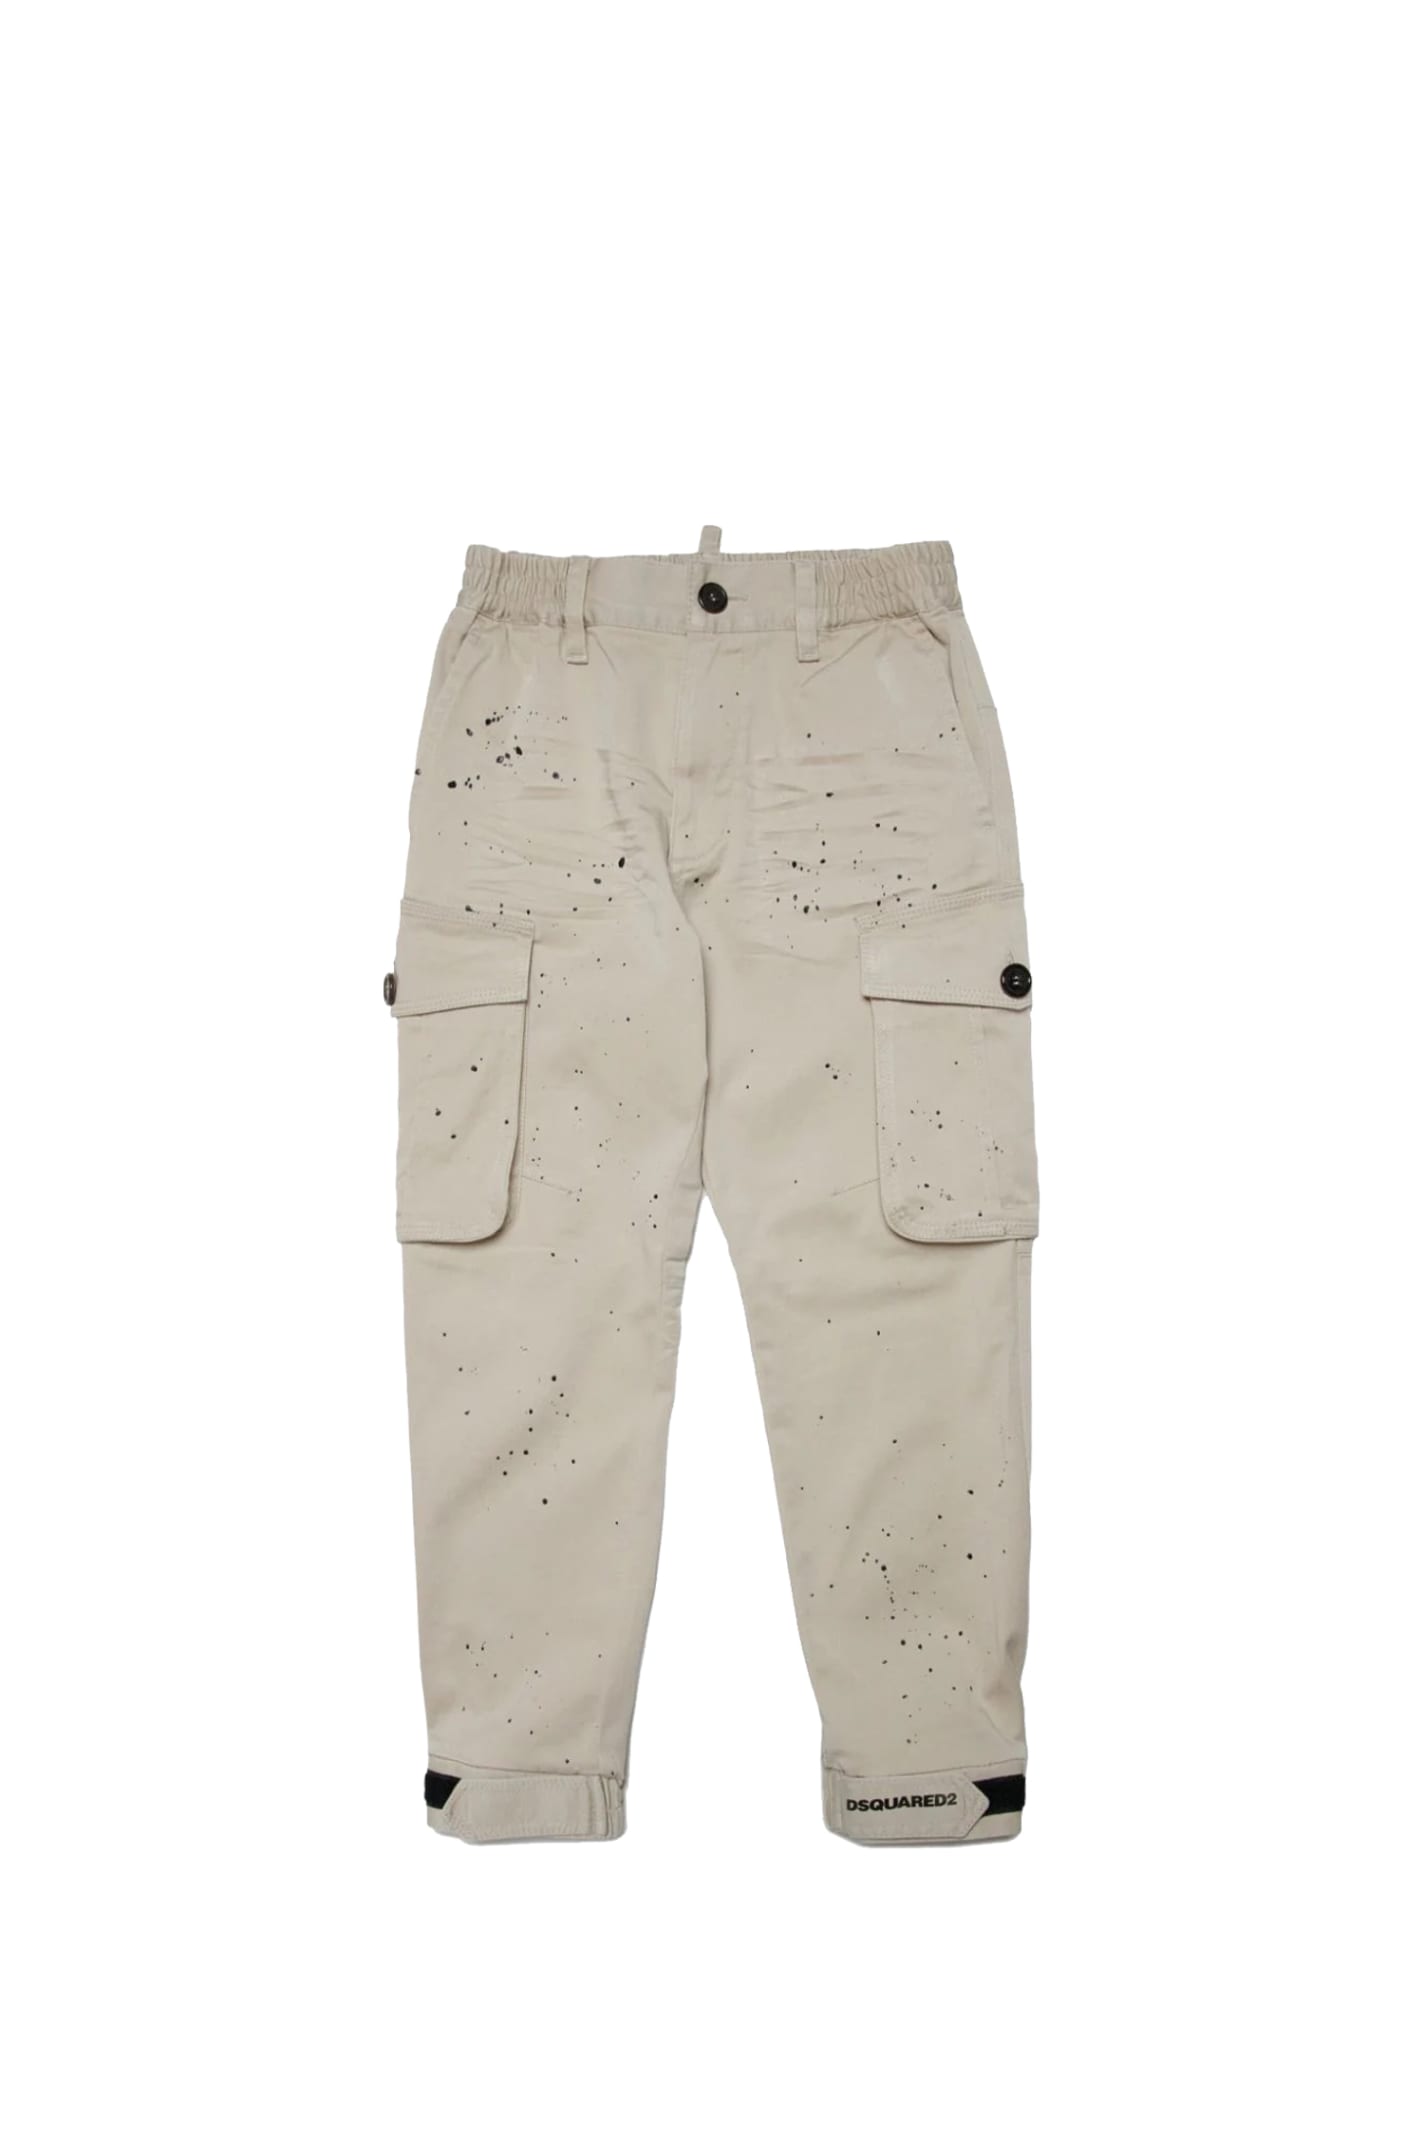 Dsquared2 Kids' Pants With Print In Beige